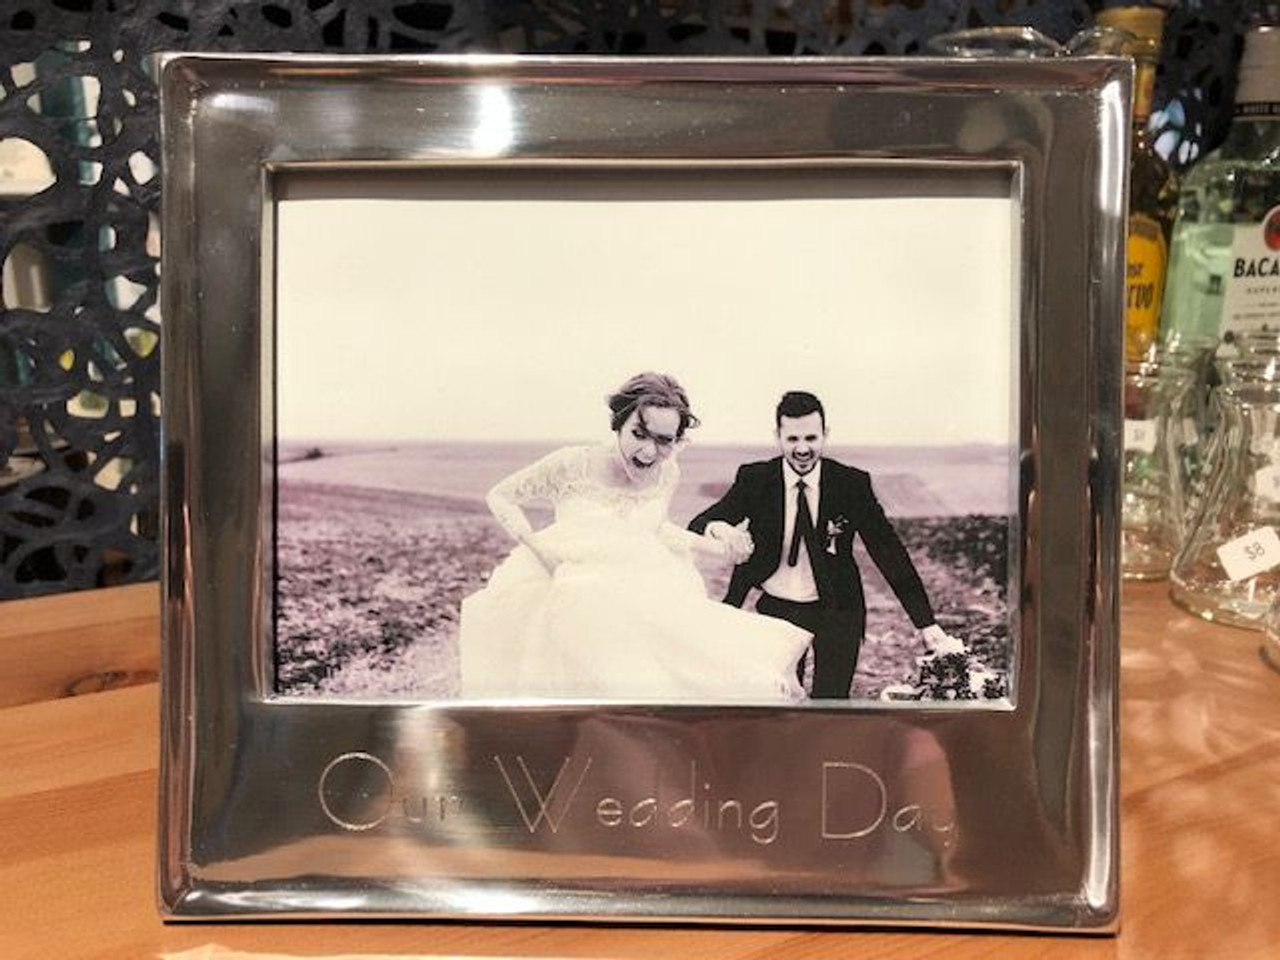 Our Wedding Day frame 5x7